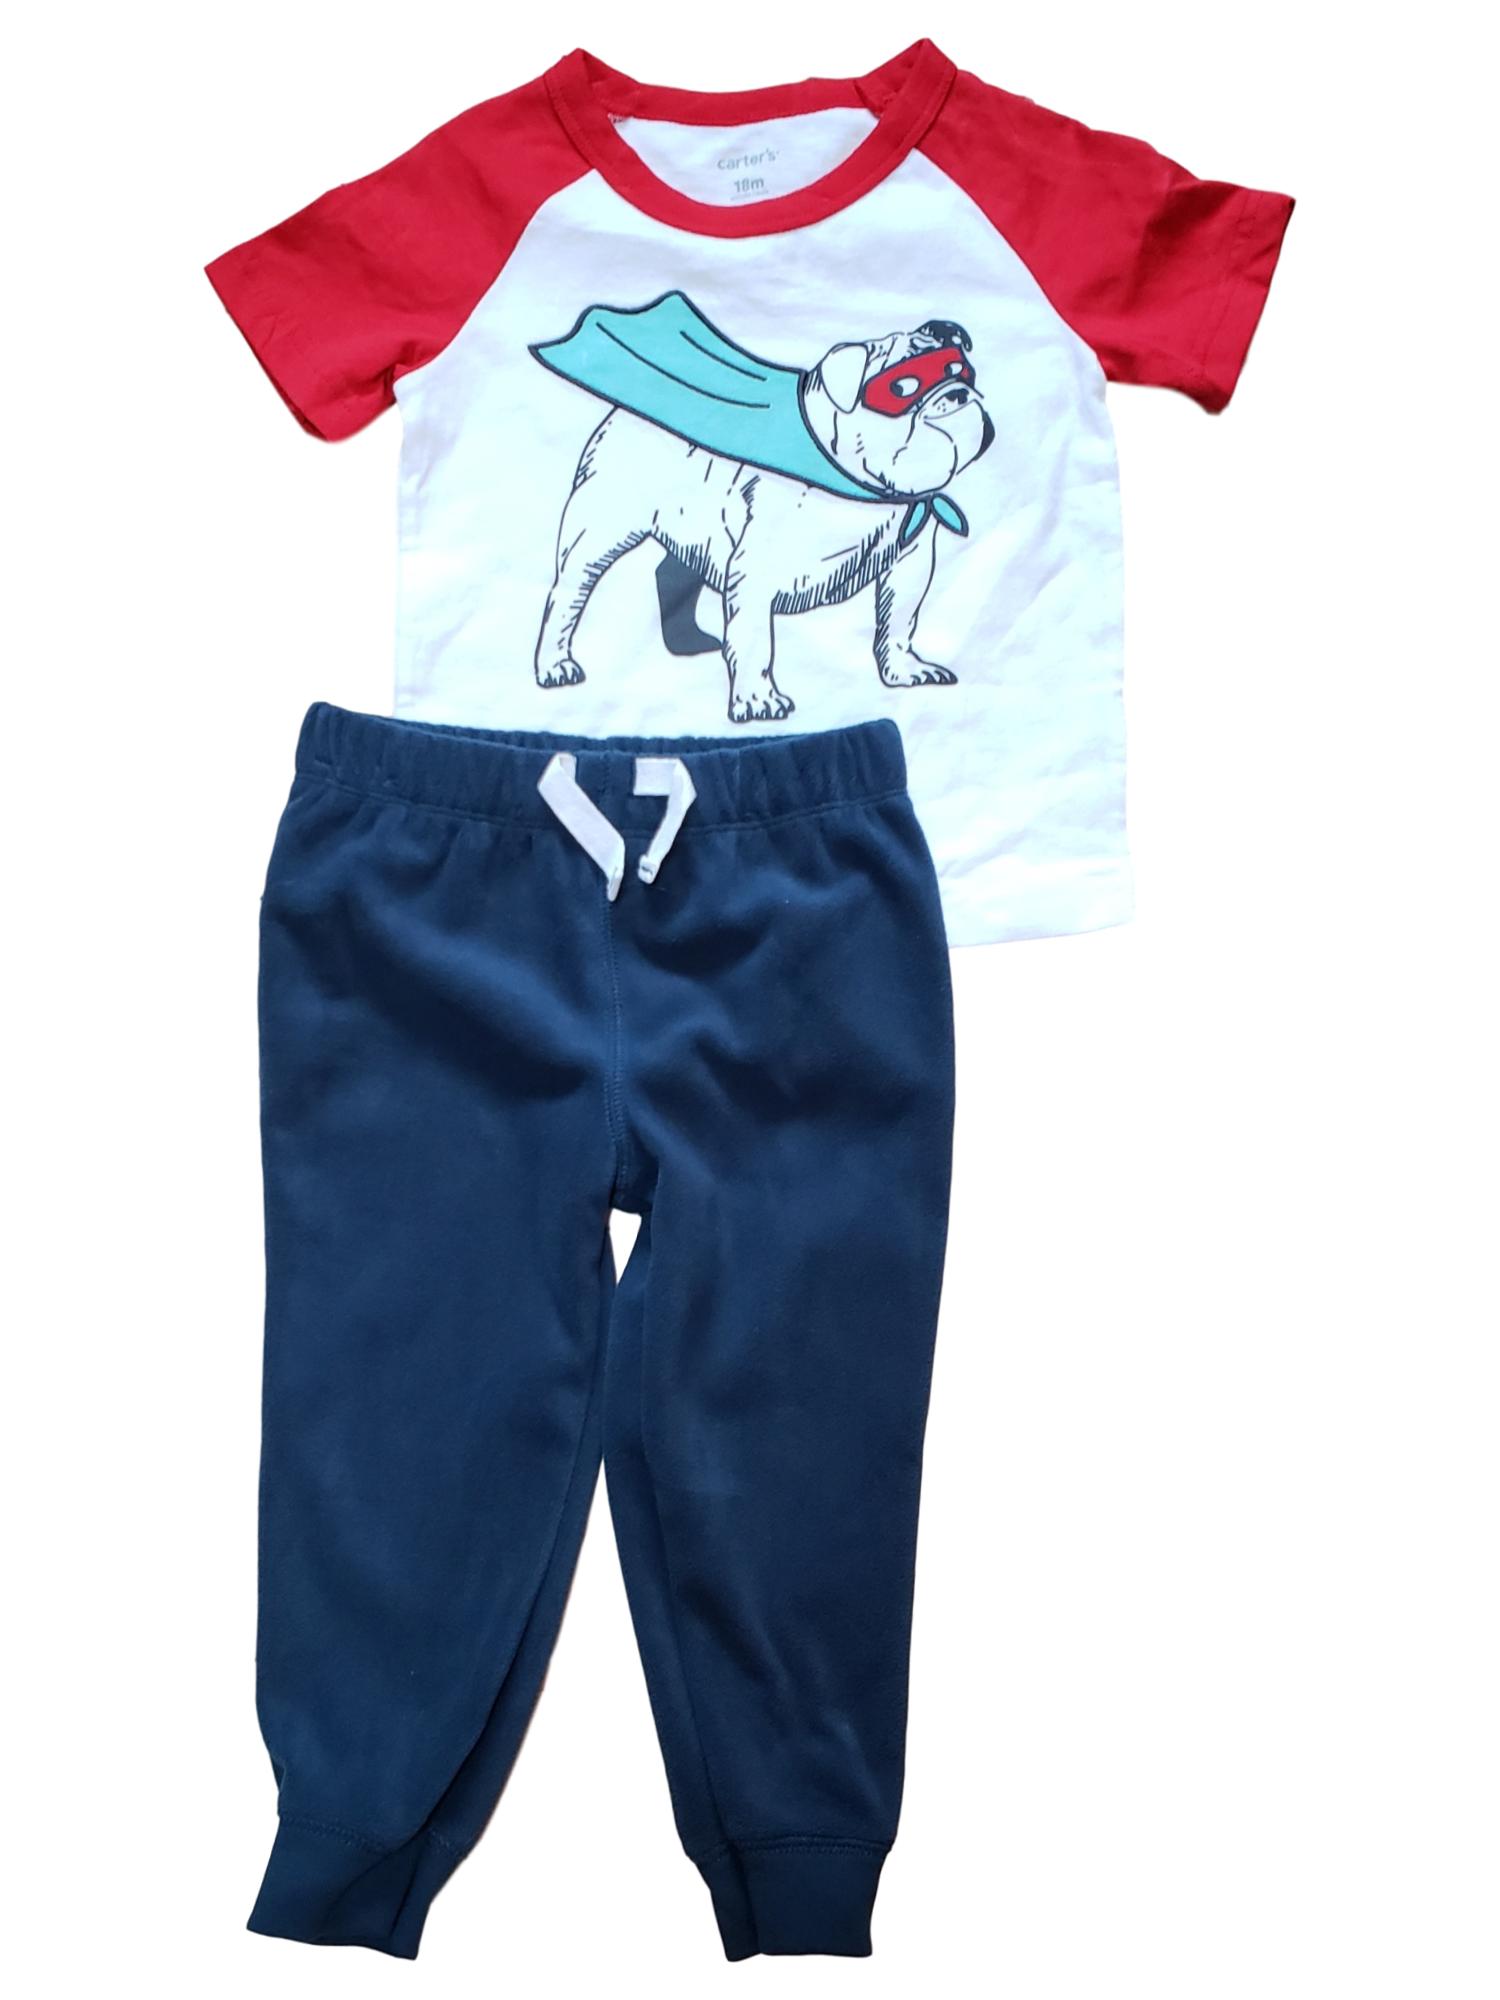 Carter's Carters Infant Baby Boys Super Hero Bull Dog Outfit 2 Piece Set 18 Months